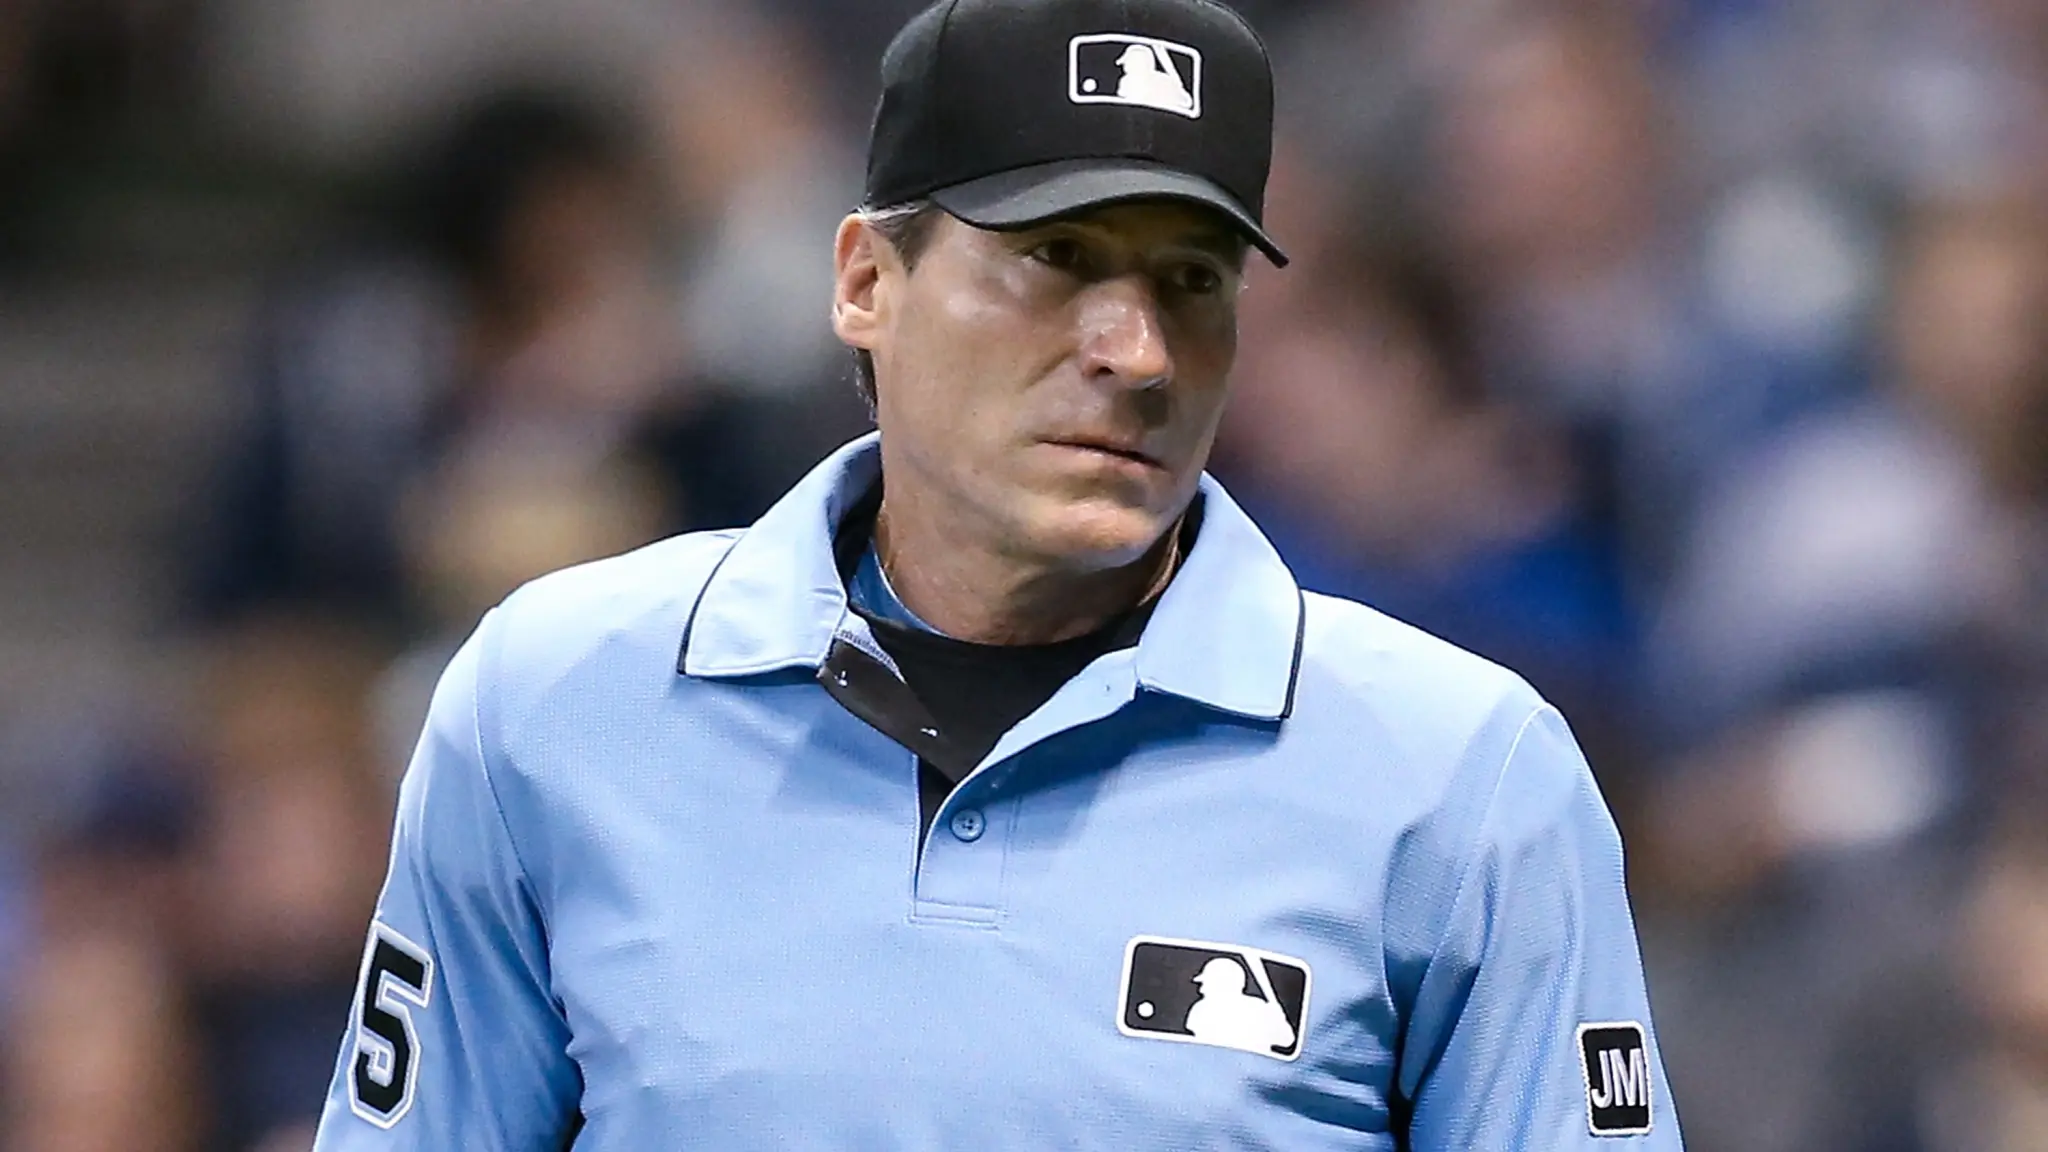 MLB umpires get support from players in perfectly imperfect game